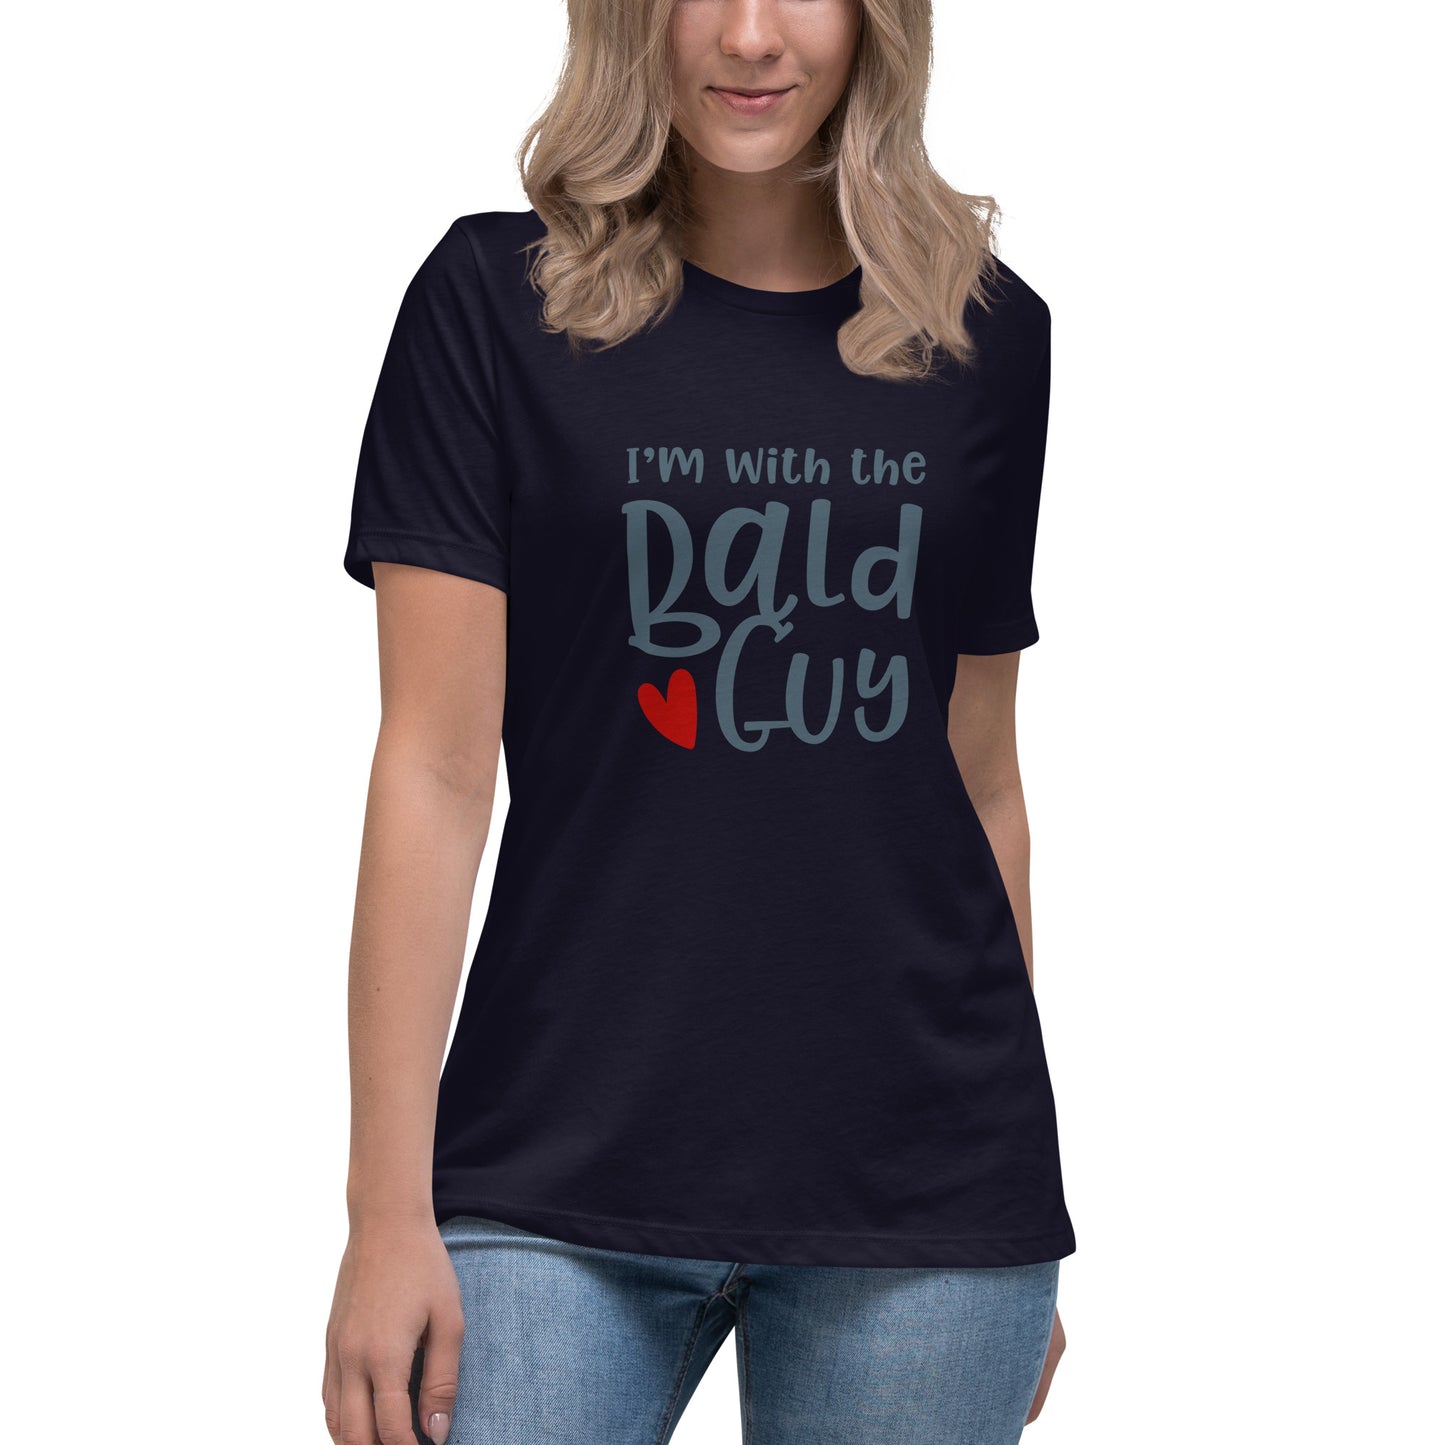 I'm With The Bald Guy Women's Relaxed T-Shirt - Bella + Canvas 6400